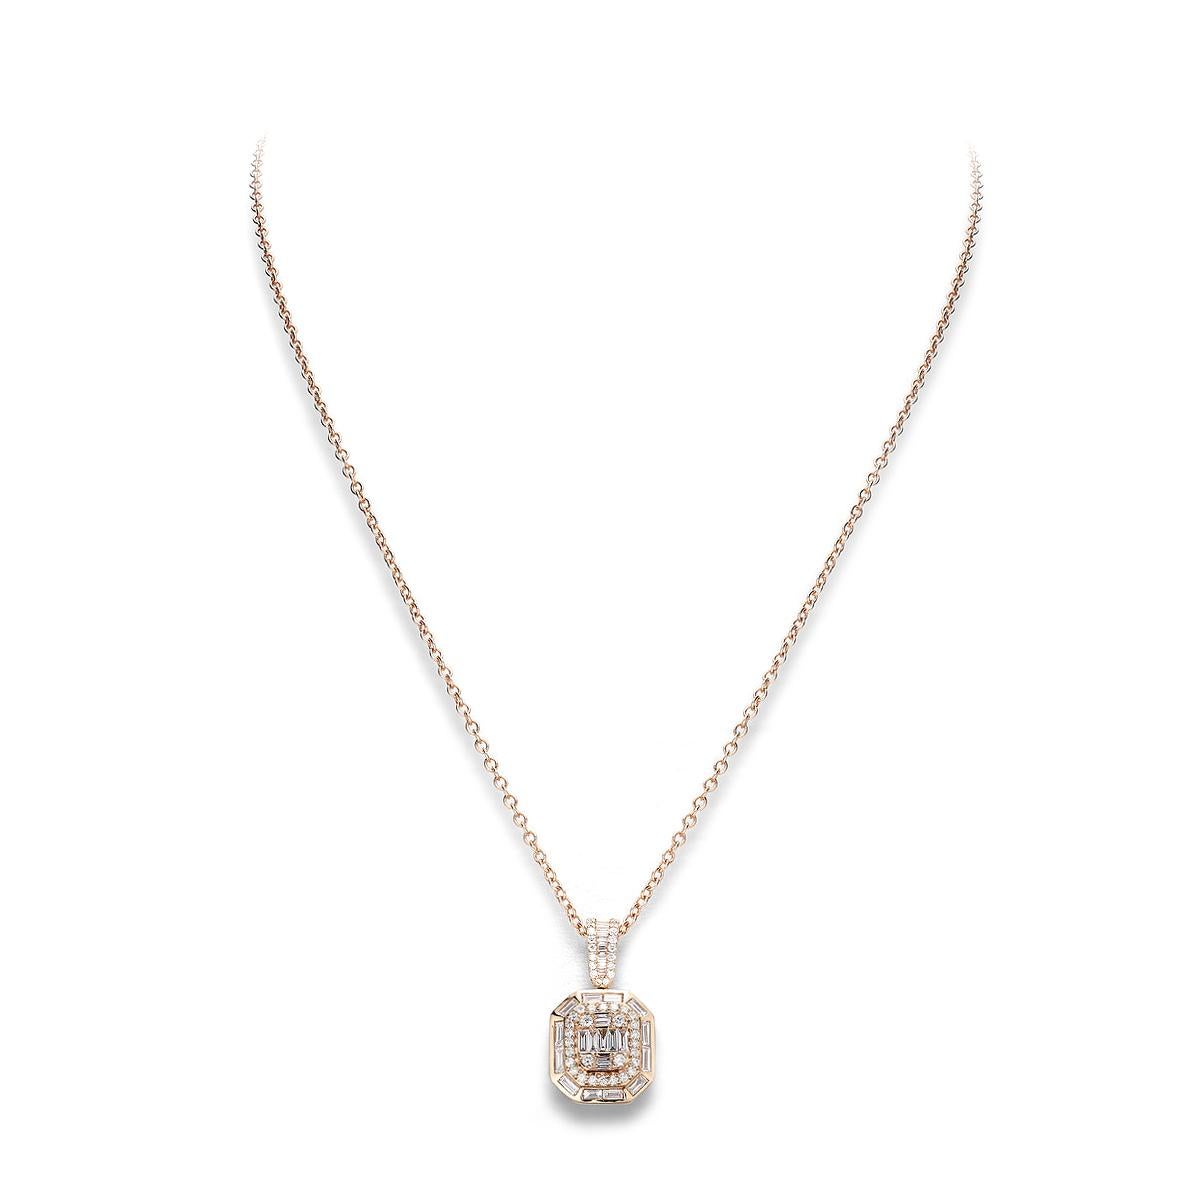 Pendant in 18kt pink gold set with 46 diamonds 0.67 cts and 32 baguette cut diamonds 0.67 cts        